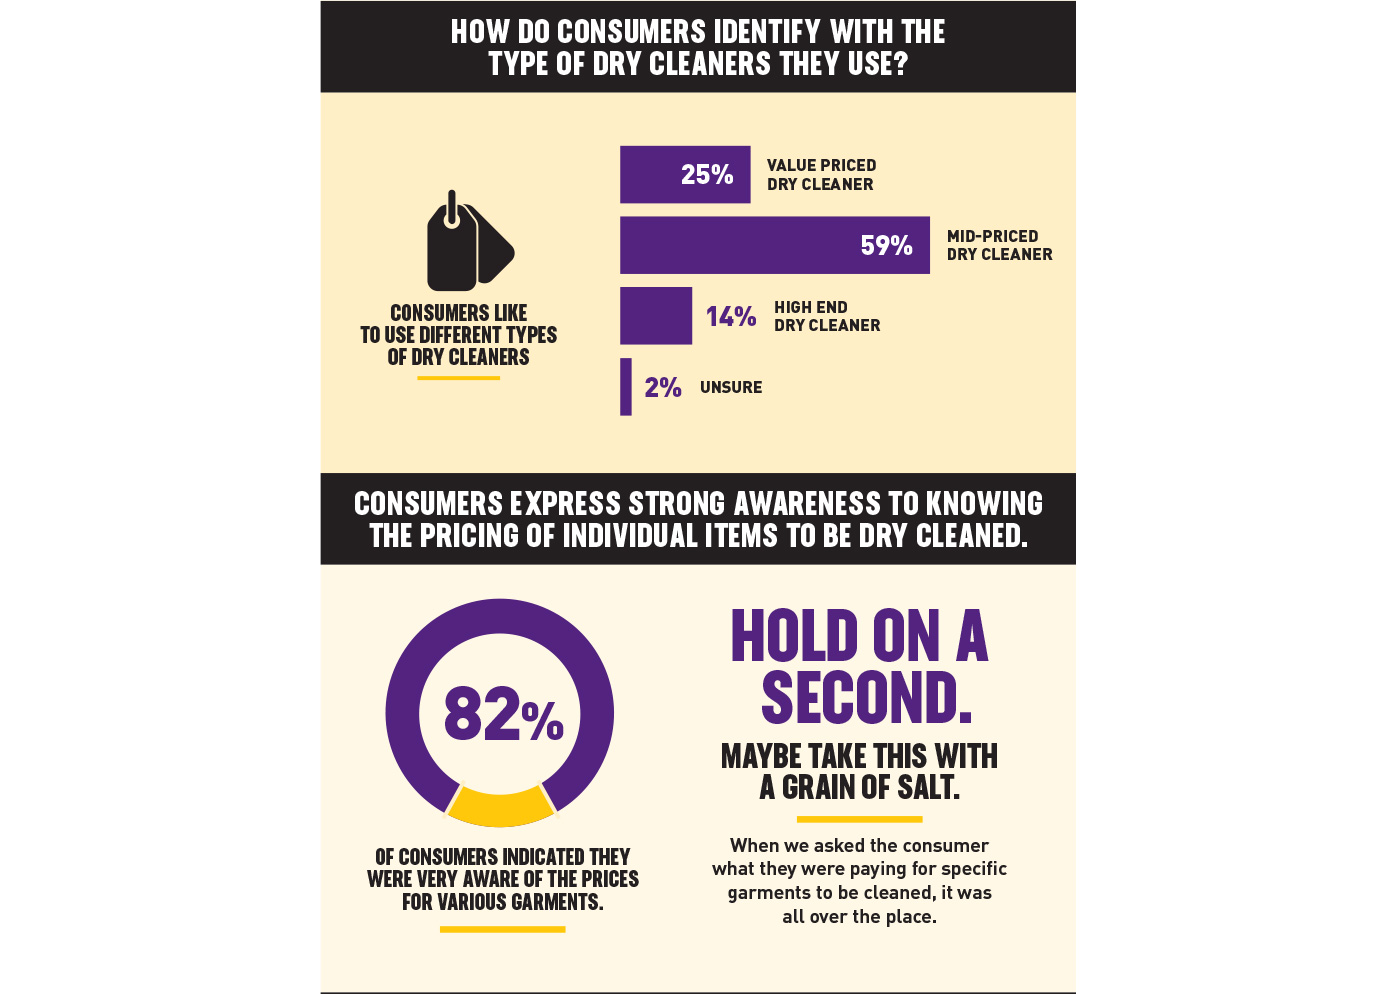 How Do Consumers Identify With The Type Of Dry Cleaners They Use?